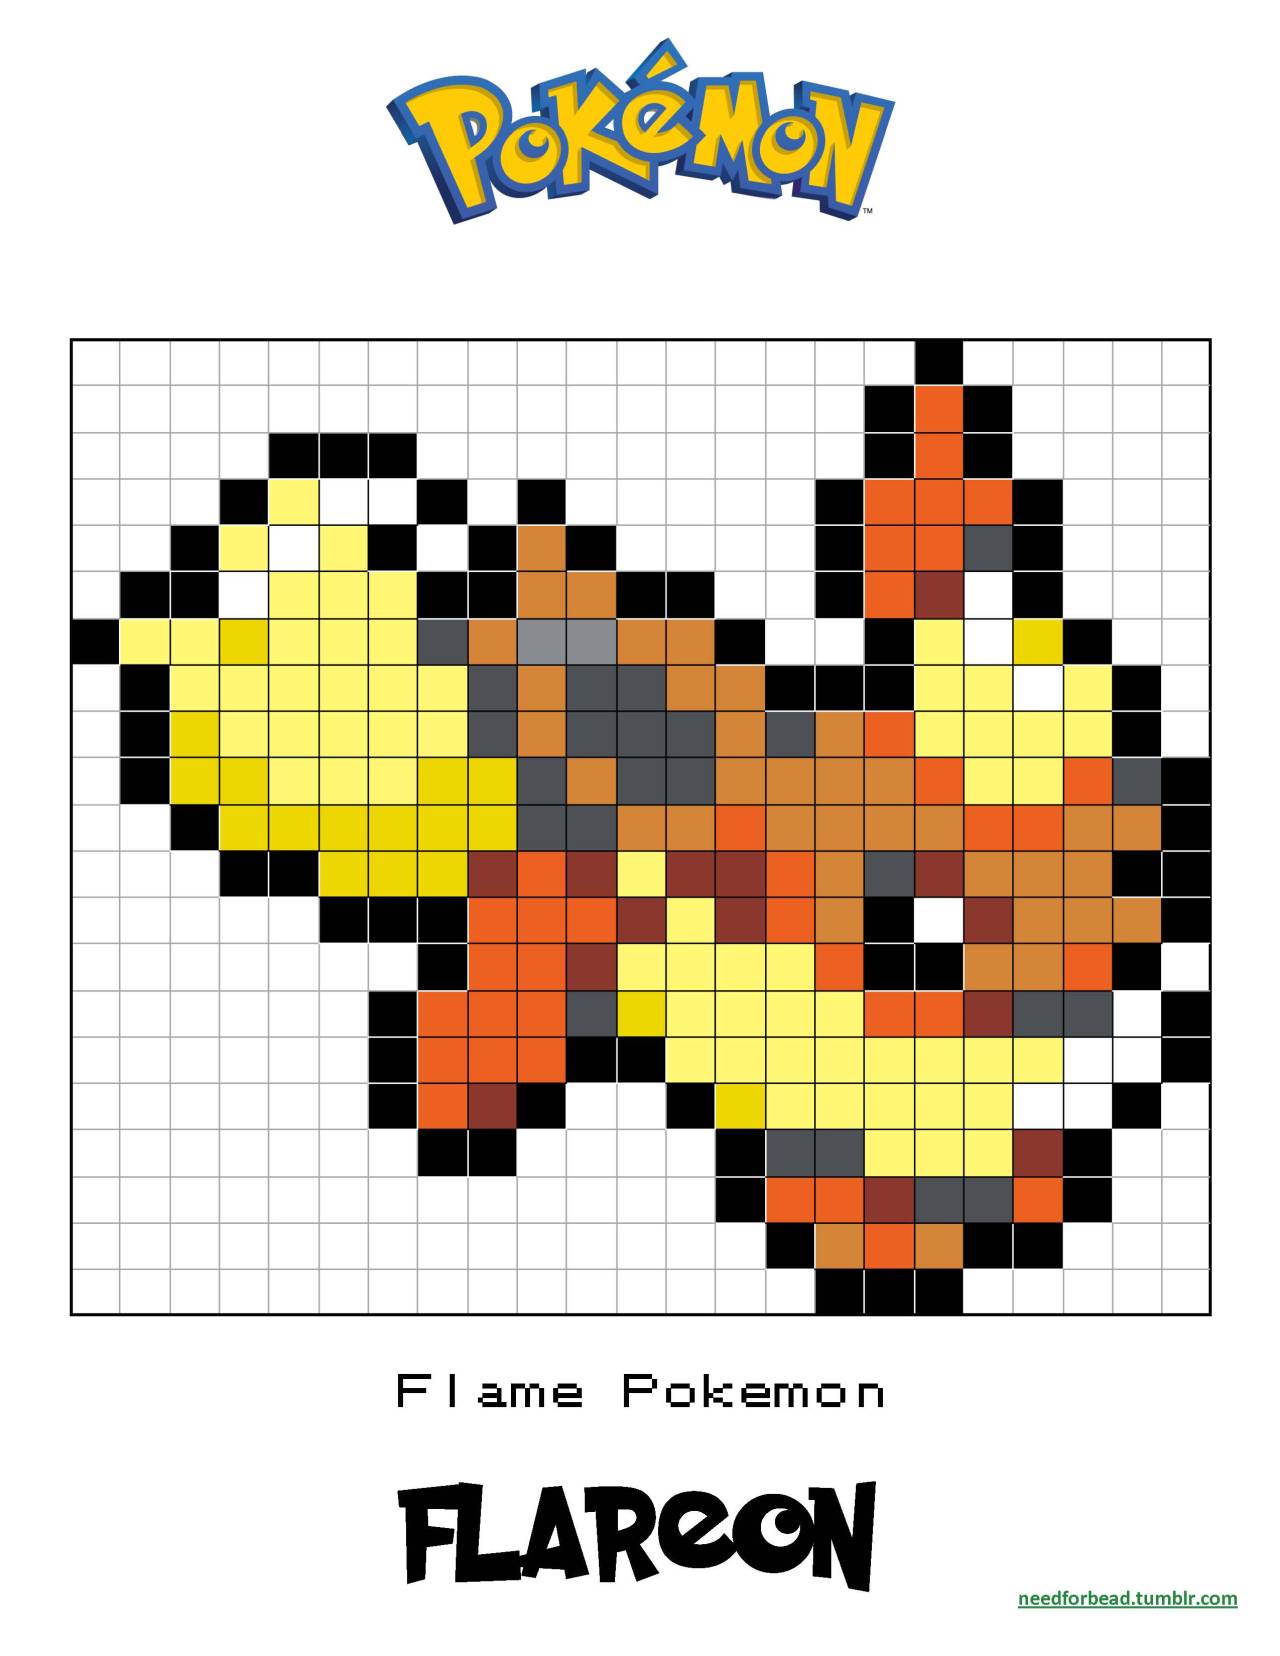 Pokemon: Flareon Pokemon is managed by The... - Need for Bead